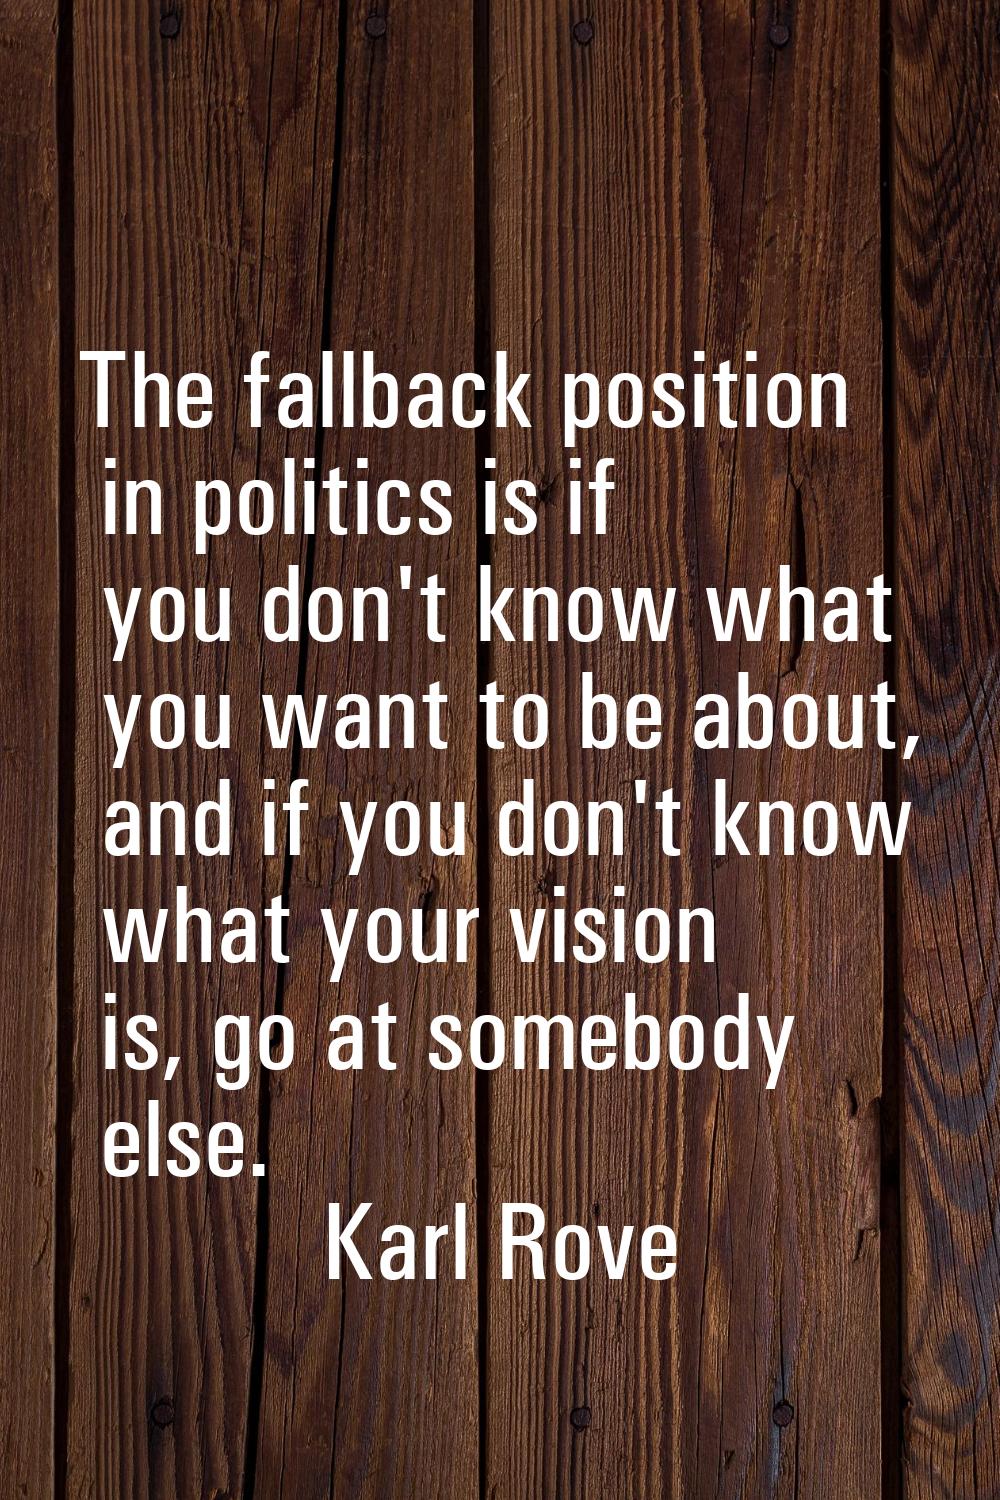 The fallback position in politics is if you don't know what you want to be about, and if you don't 